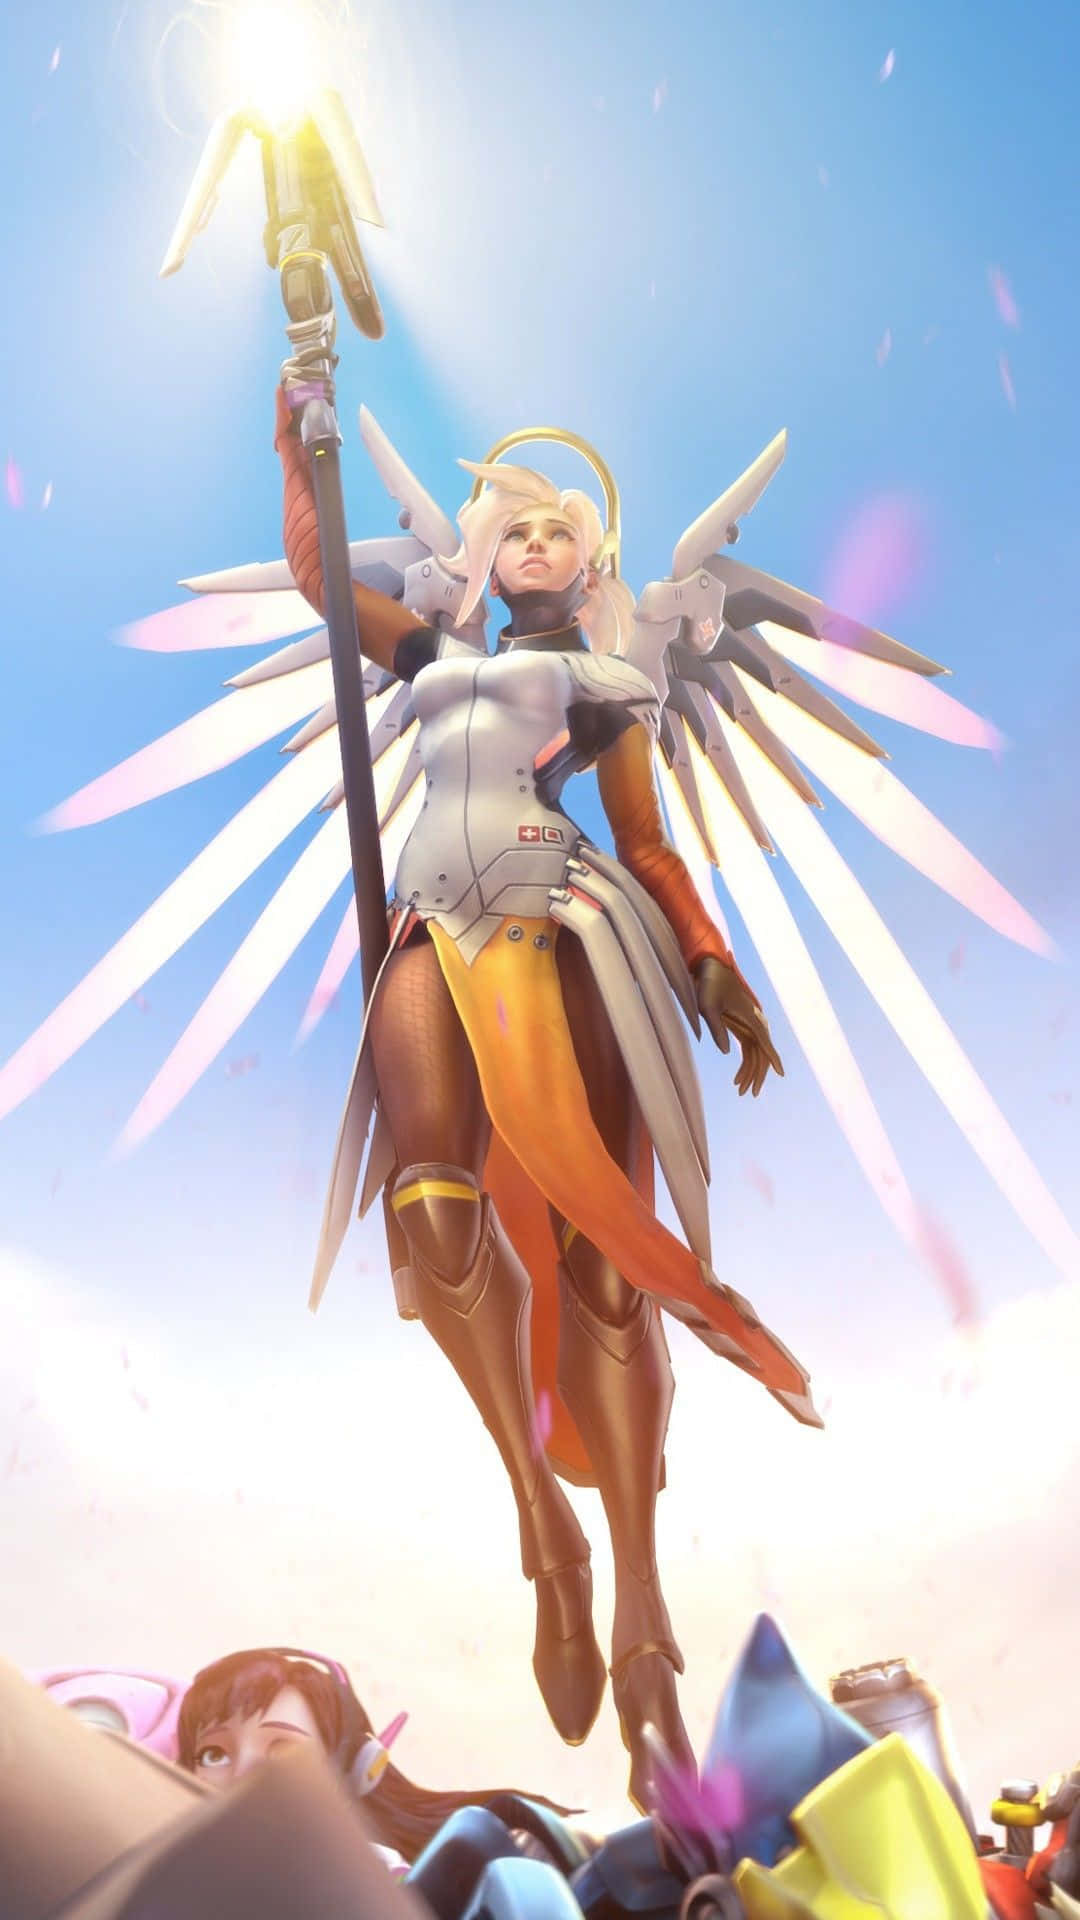 Overwatch's Mercy, The Guardian Angel, Soaring In Action